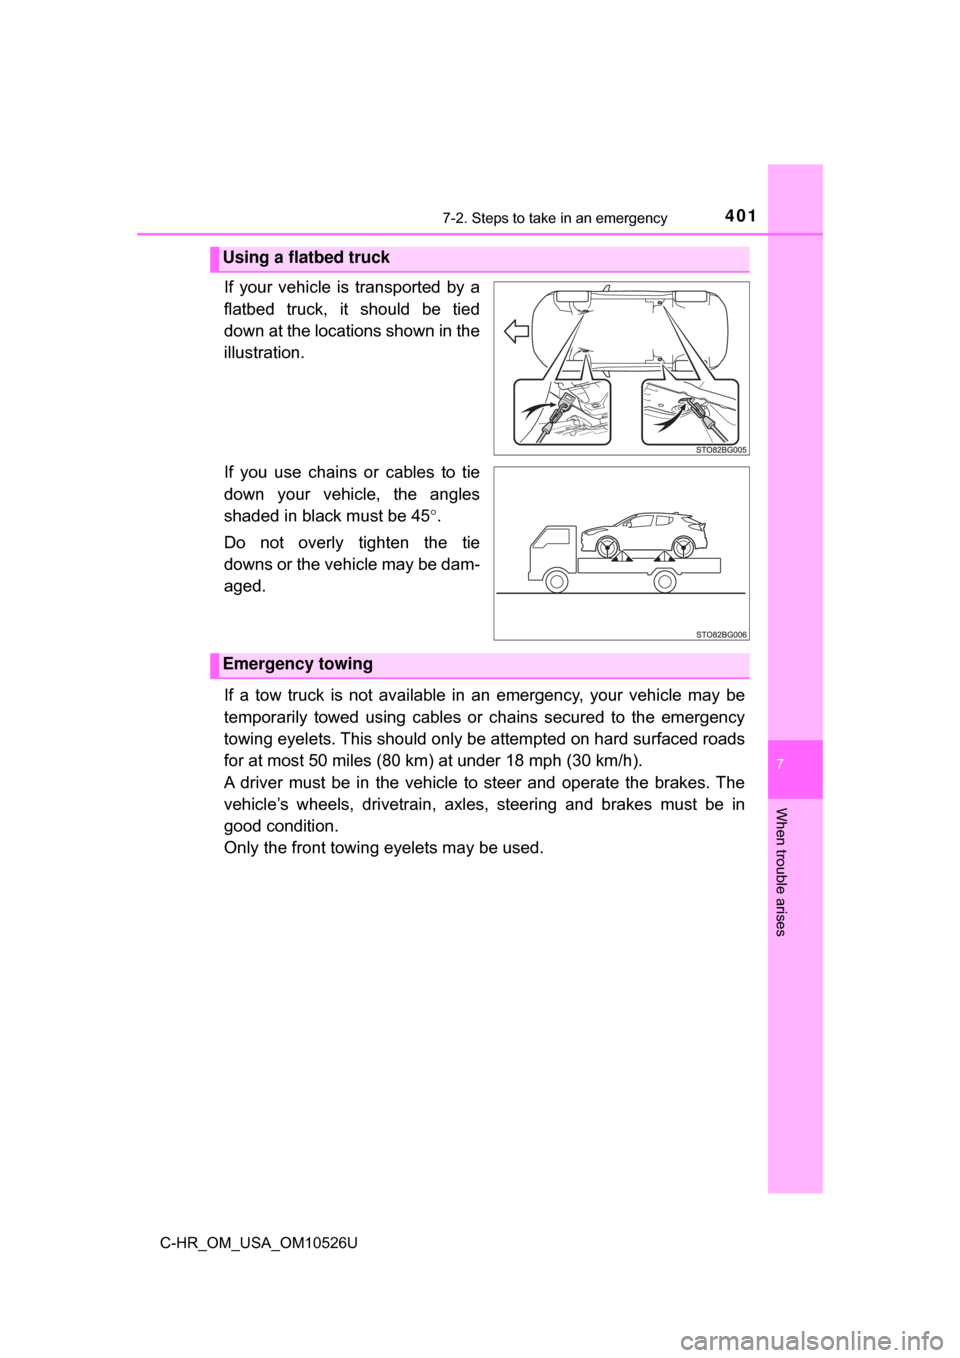 TOYOTA C-HR 2018 1.G Service Manual 4017-2. Steps to take in an emergency
7
When trouble arises
C-HR_OM_USA_OM10526U
If your vehicle is transported by a
flatbed truck, it should be tied
down at the locations shown in the
illustration.
I